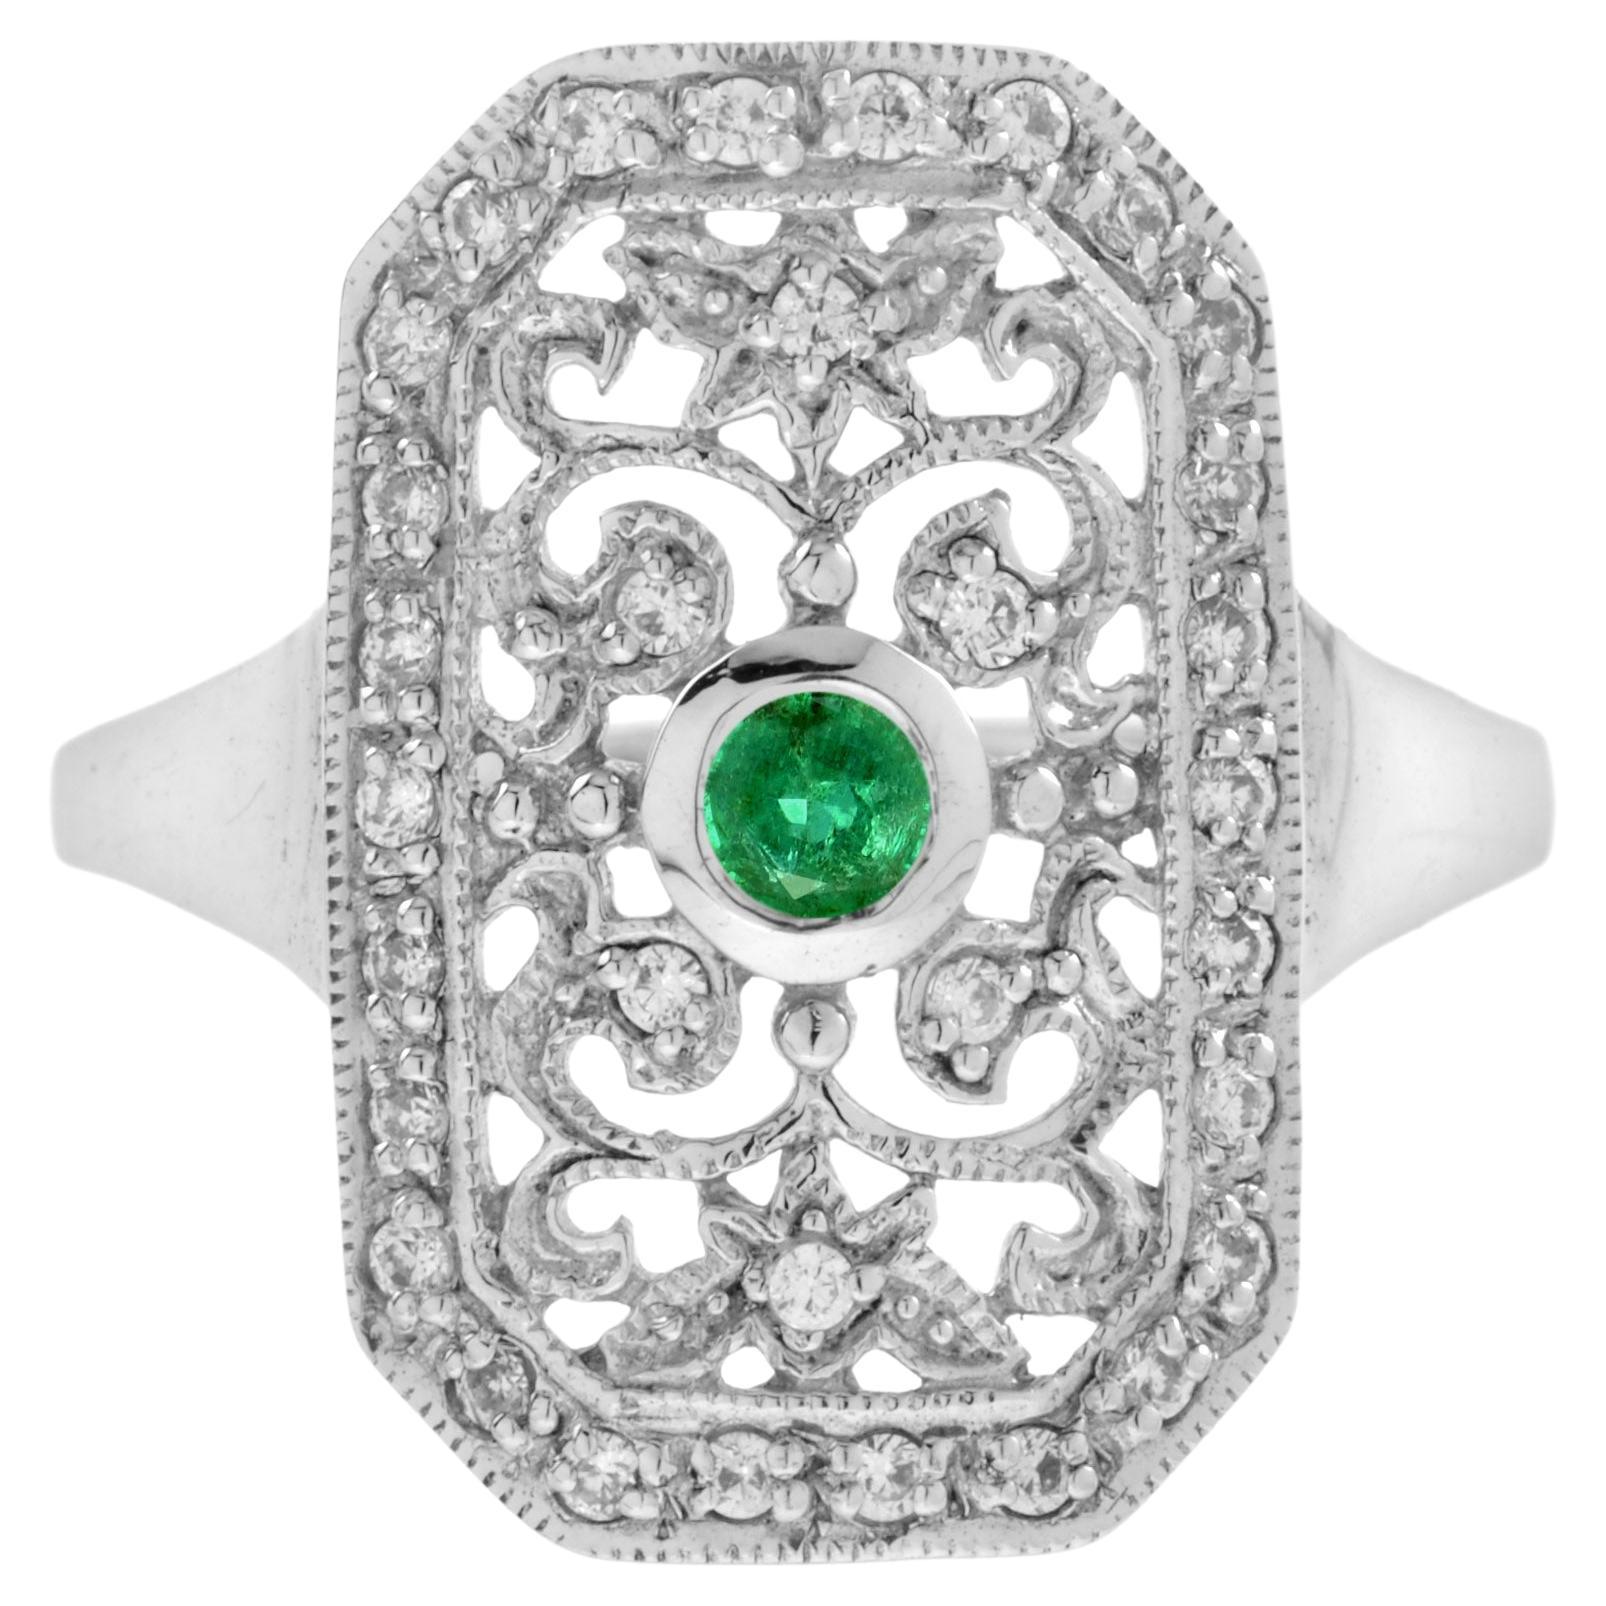 For Sale:  Emerald and Diamond Vintage Style Filigree Ring in 14K White Gold